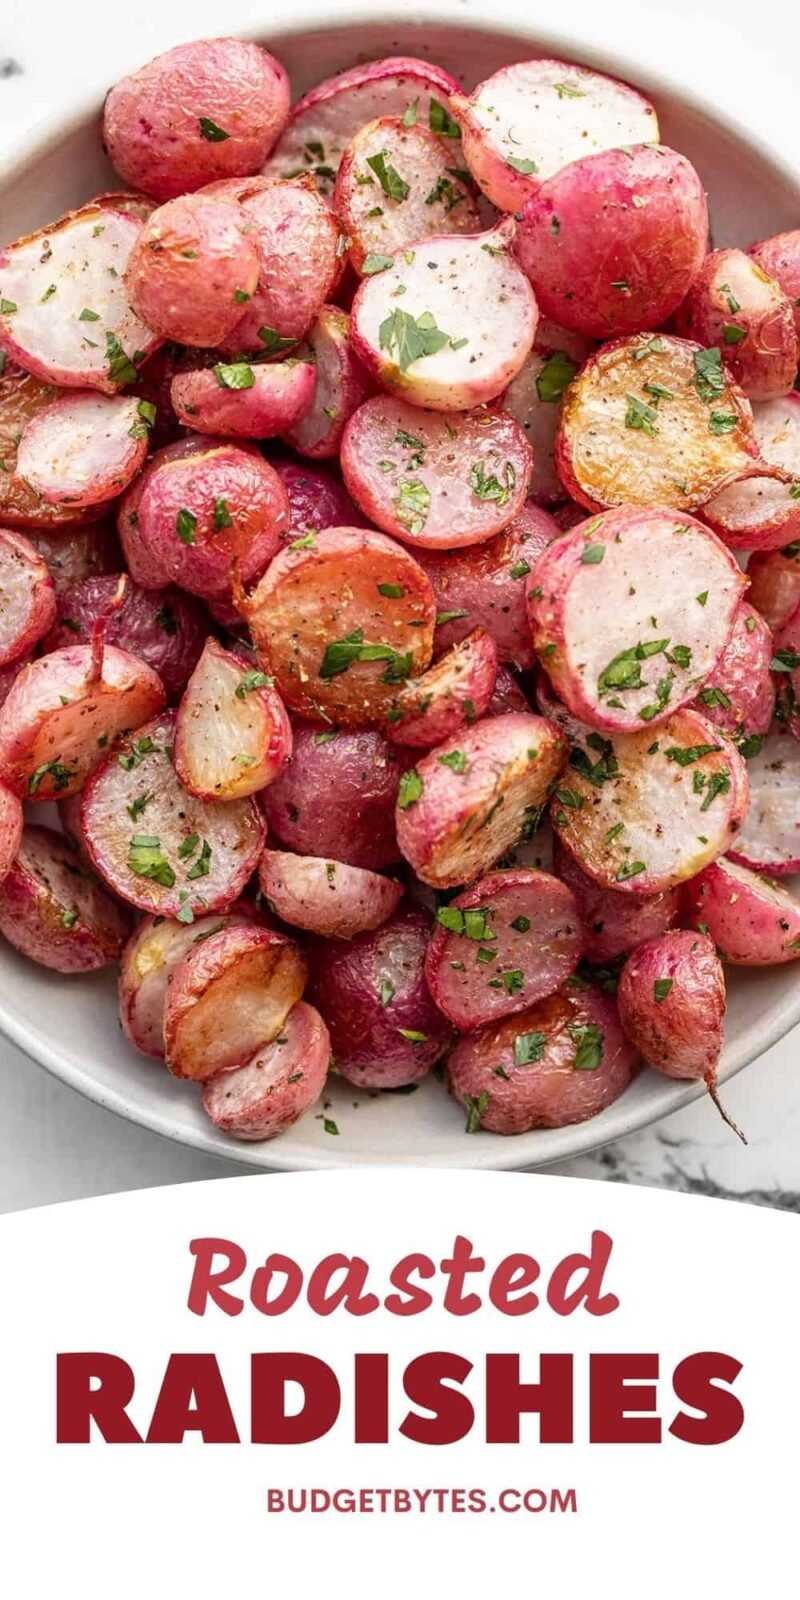 close up overhead view of a bowl of roasted radishes, title text at the bottom.